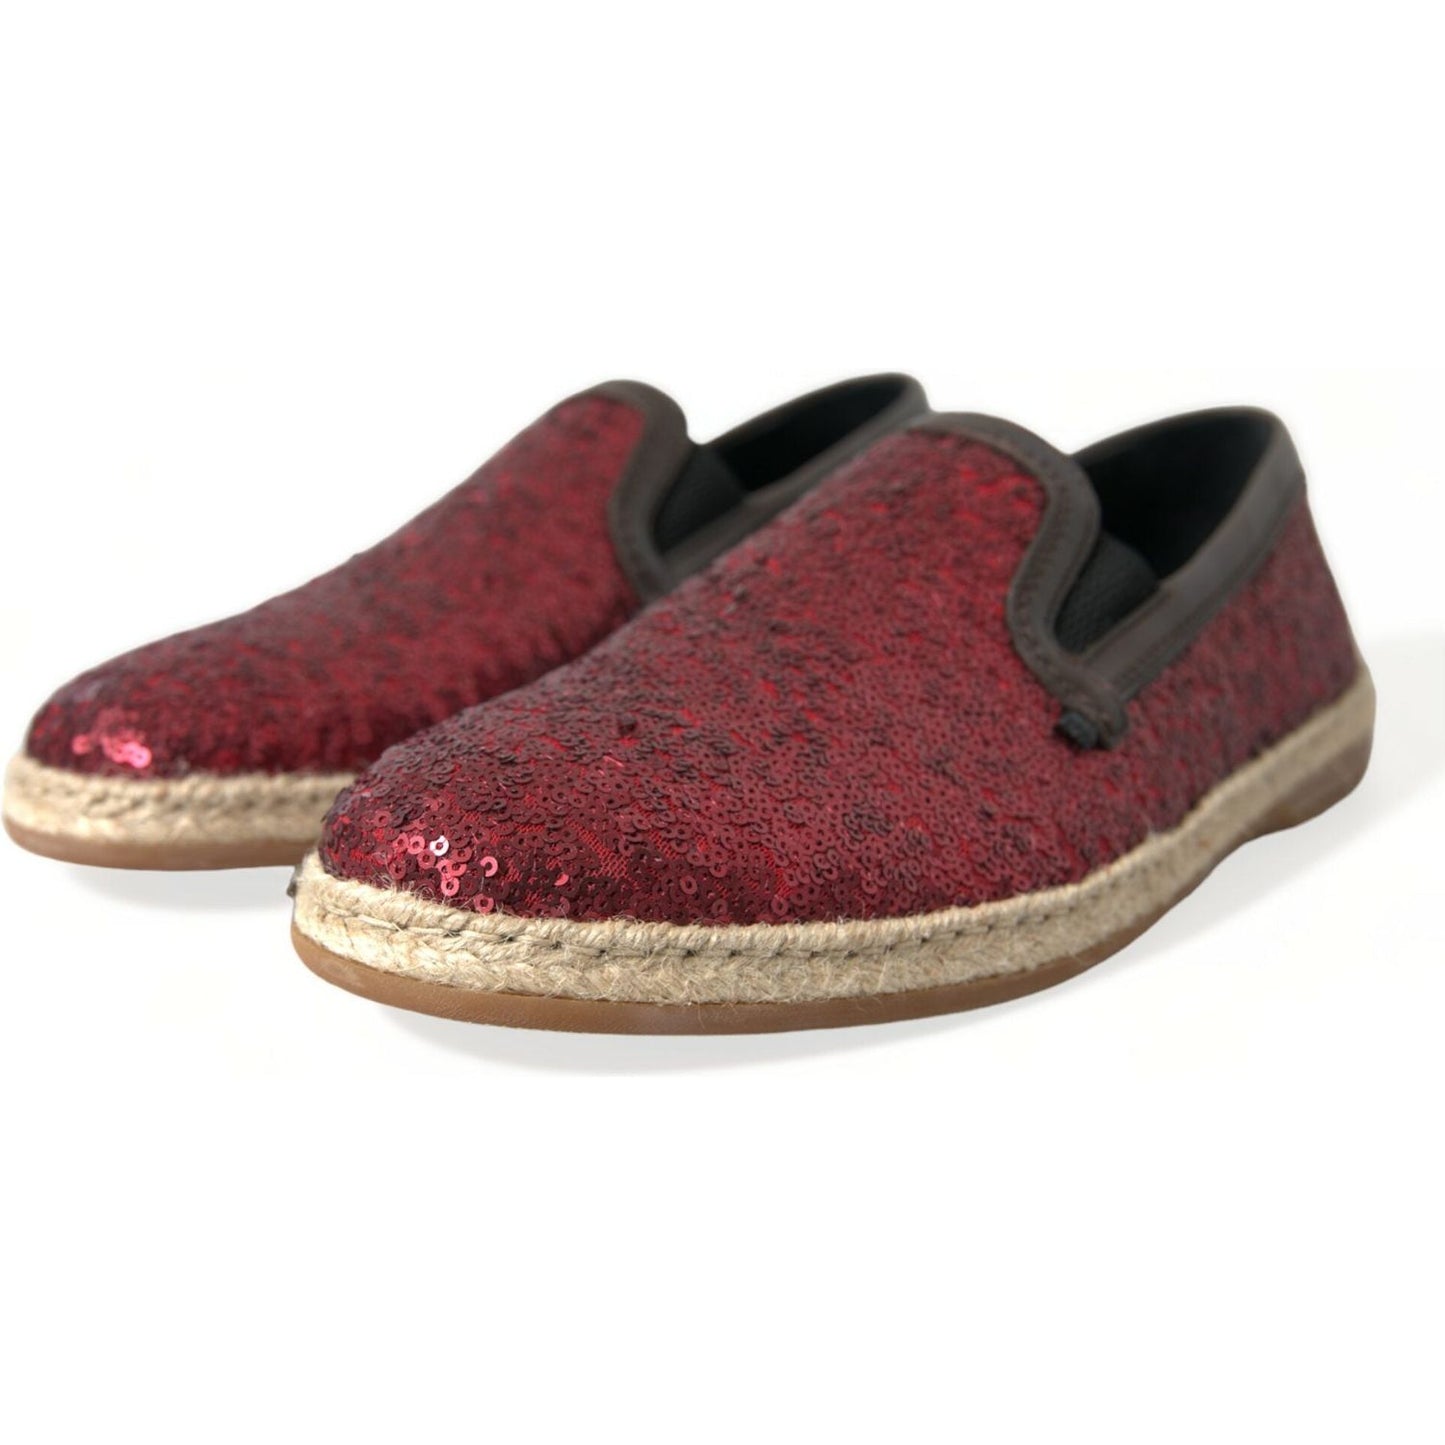 Dolce & Gabbana | Red Sequined Leather Loafers| McRichard Designer Brands   